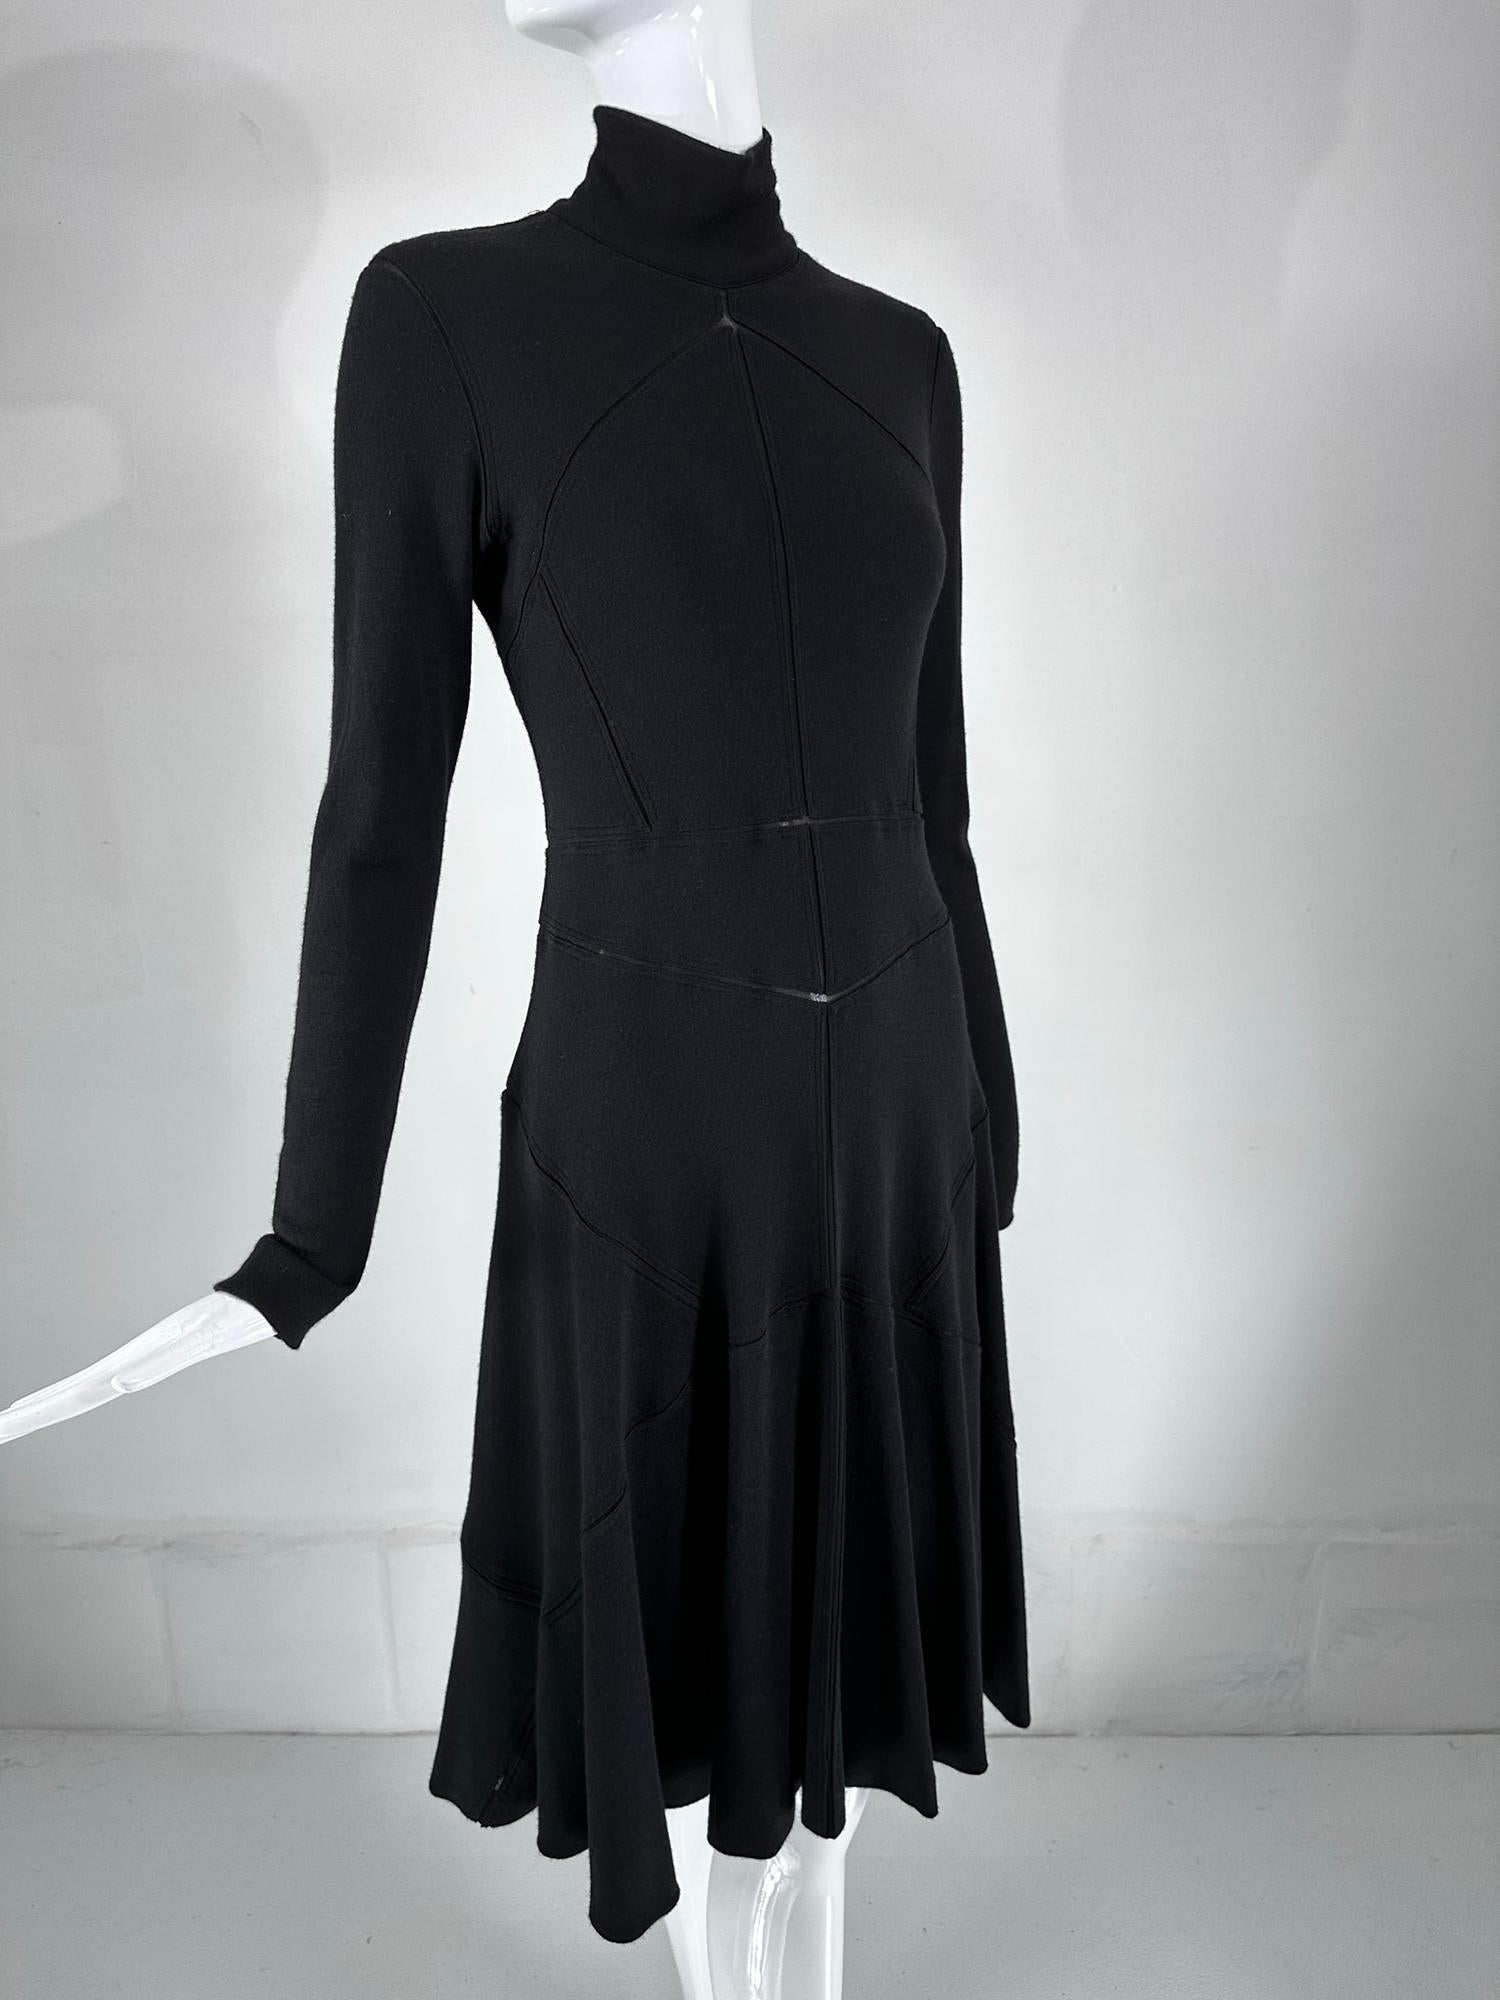 Classic Calvin Klein black cashmere/wool blend bias, peek-a-boo seam dress. Vintage Klein at his best, this dress is sophisticated and perfect for day to evening. Turtle neck, with long fitted sleeves, the dress if fitted through the torso, skims